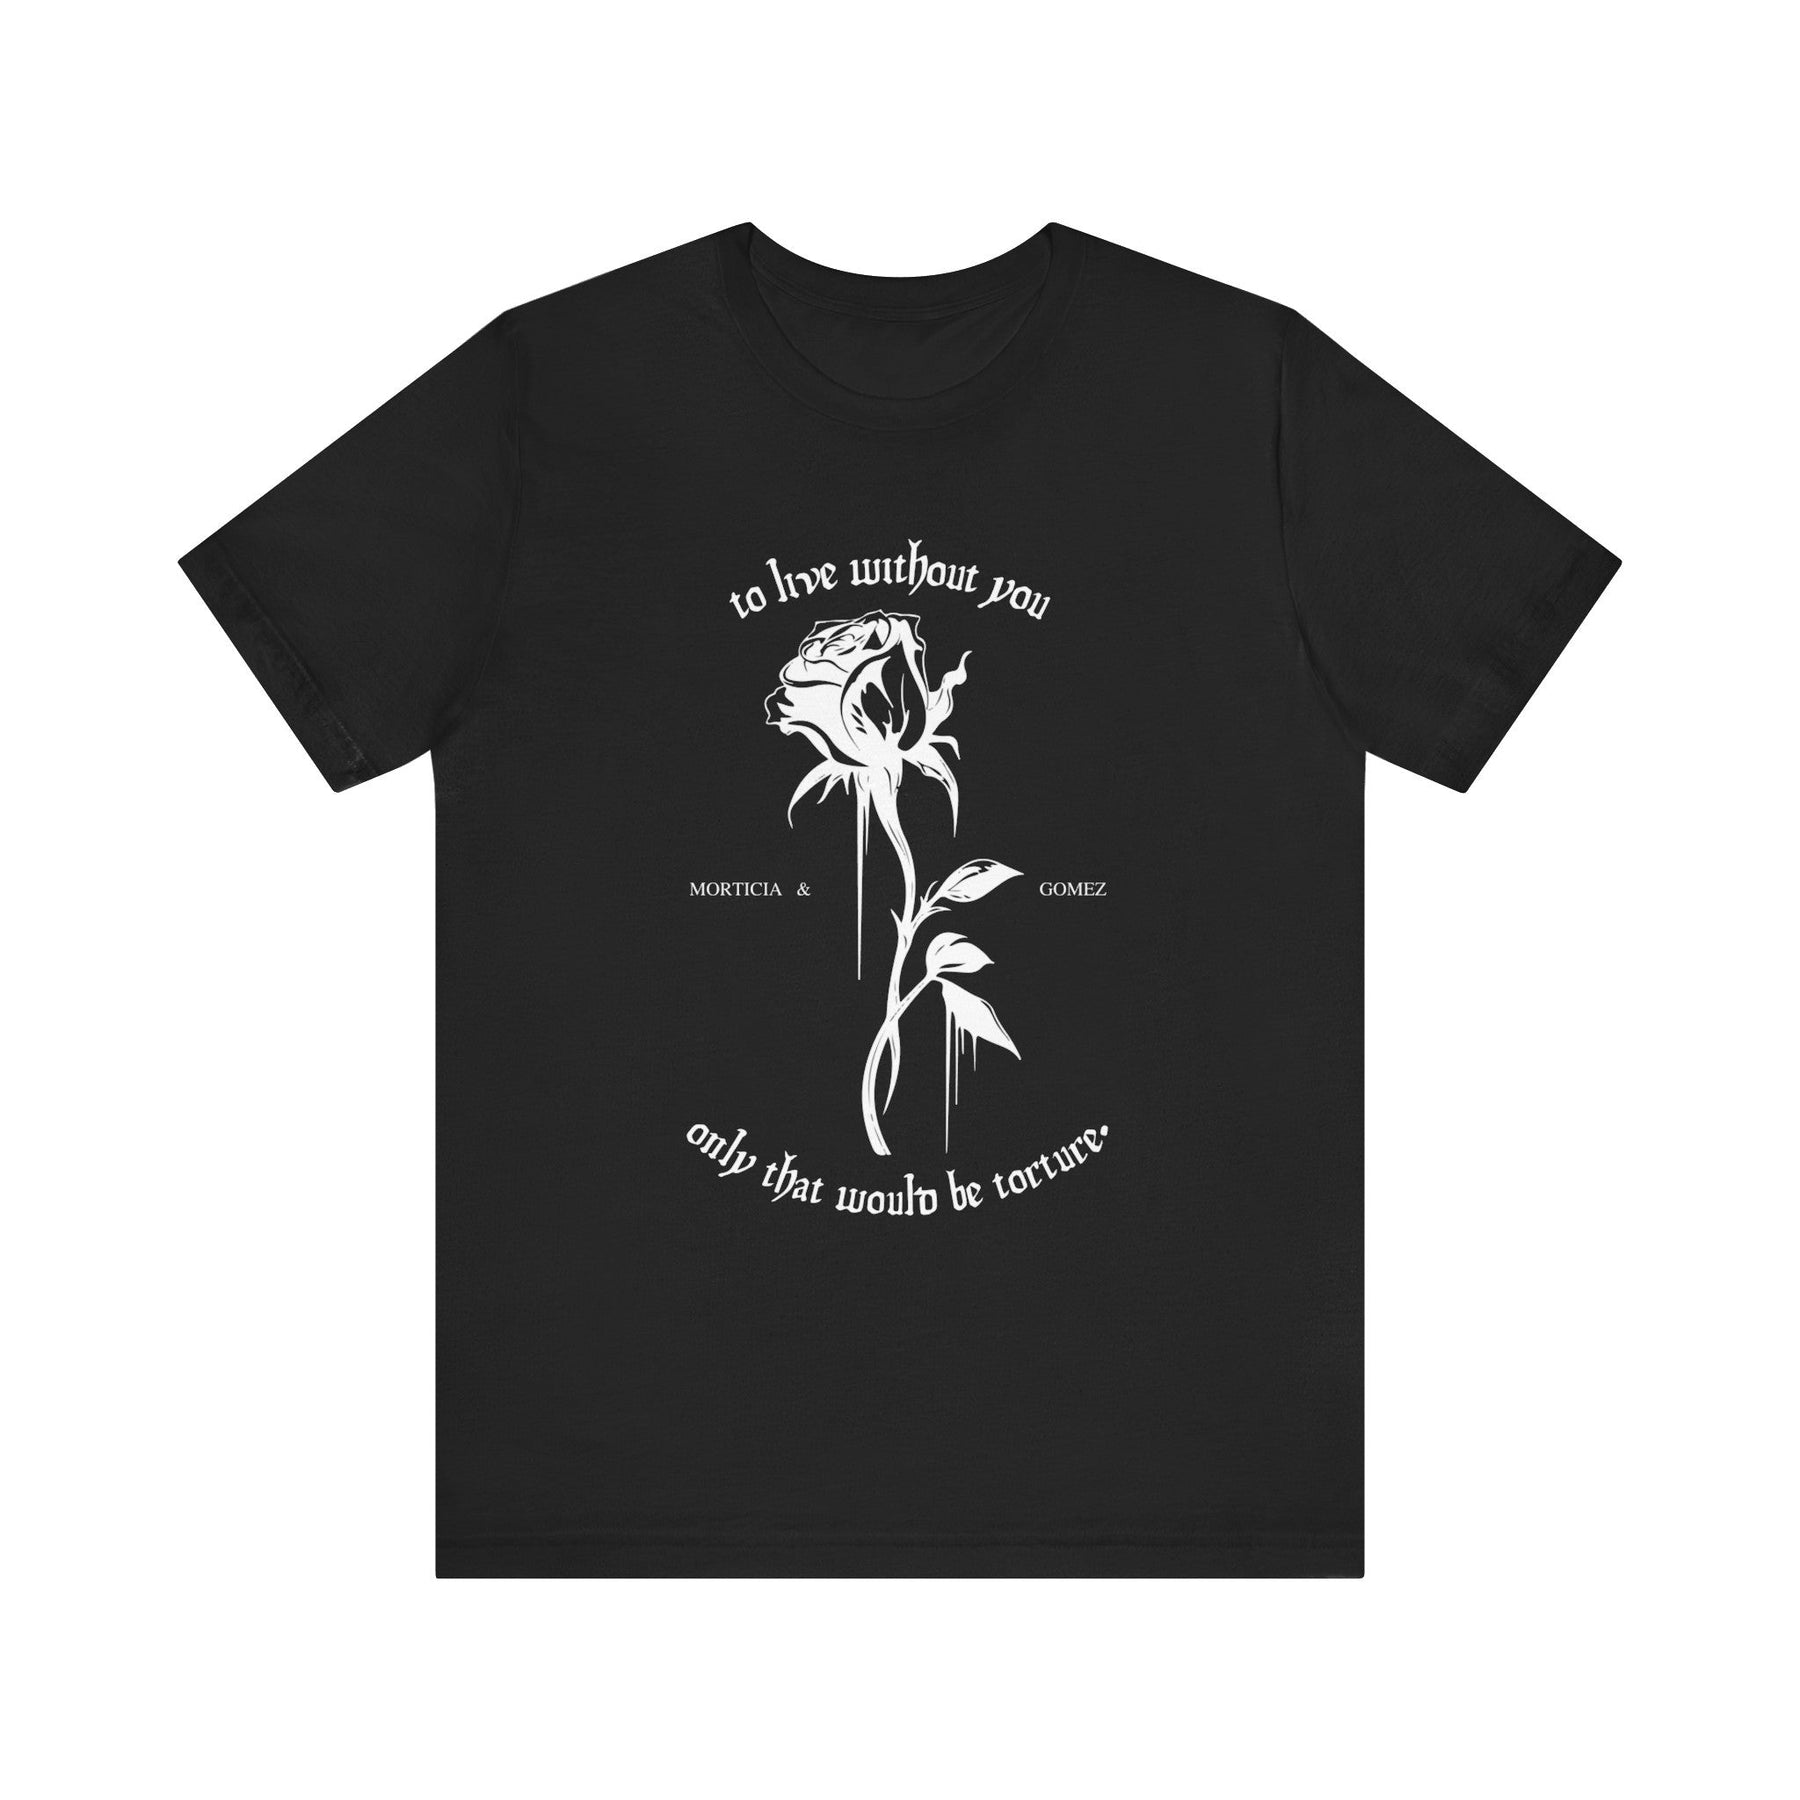 Morticia & Gomez 'To Live Without You' Gothic Rose Tee - Goth Cloth Co.T - Shirt24318507106044597638